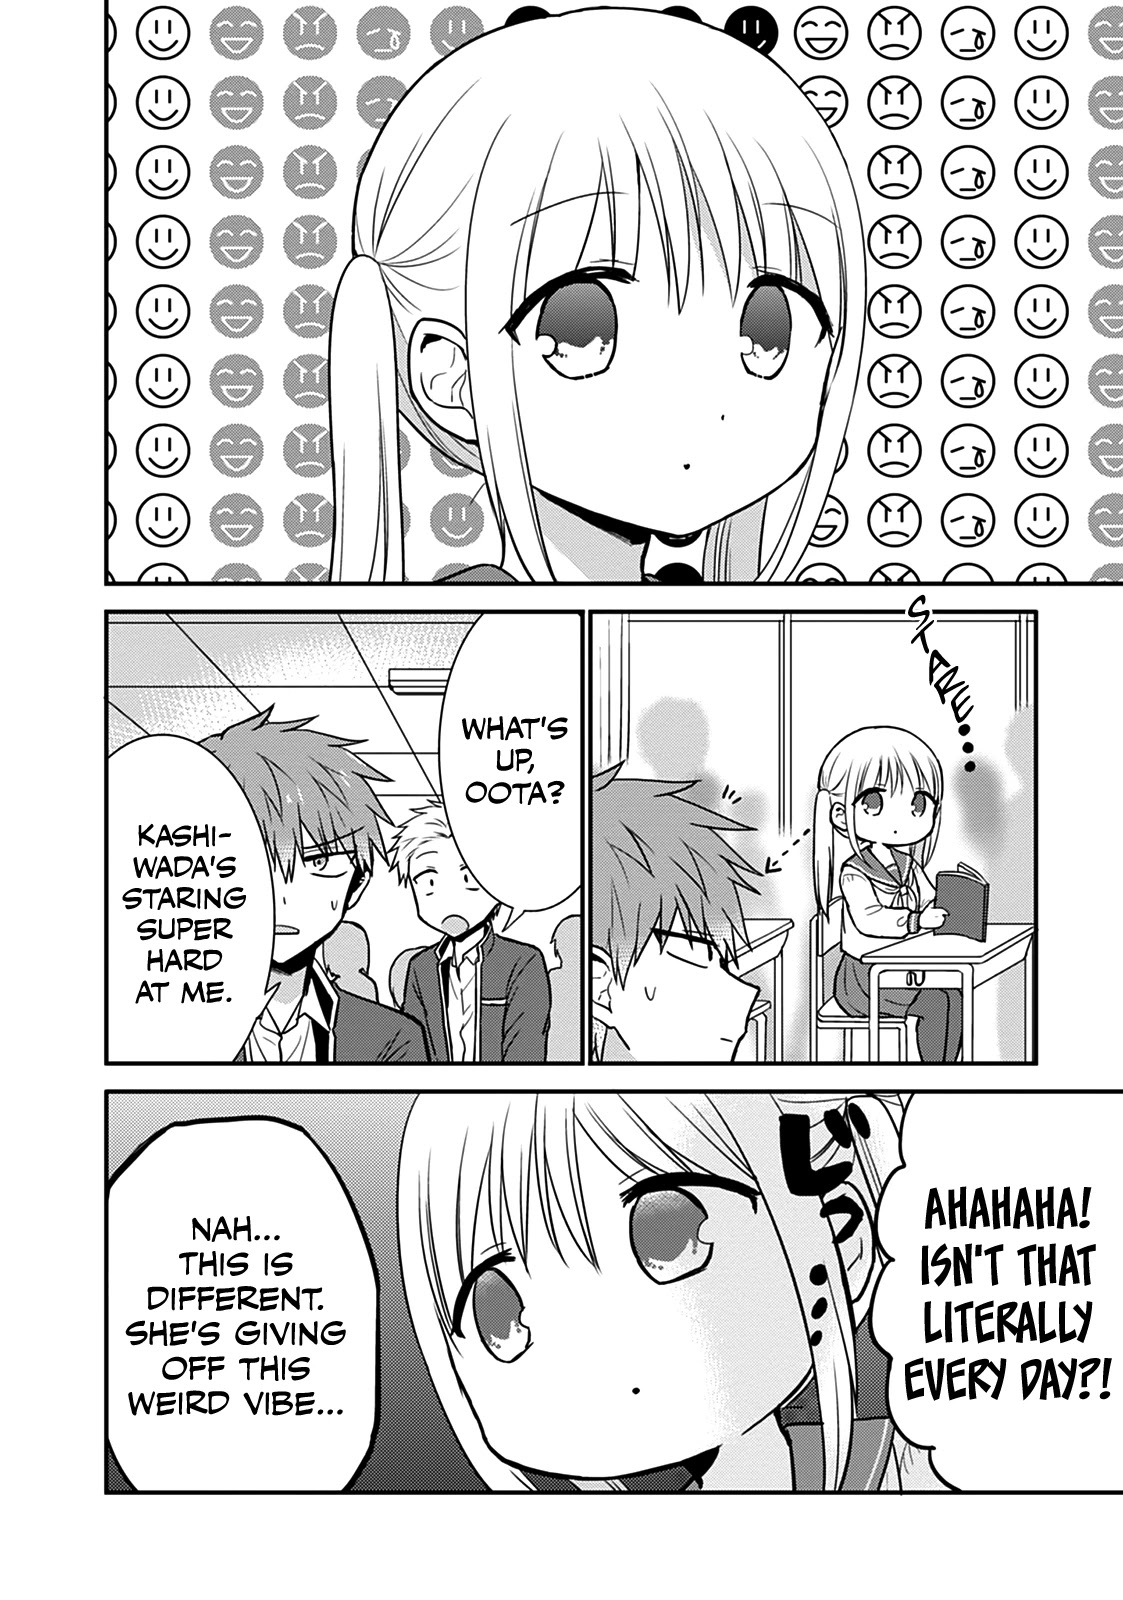 Expressionless Face Girl And Emotional Face Boy - Page 2